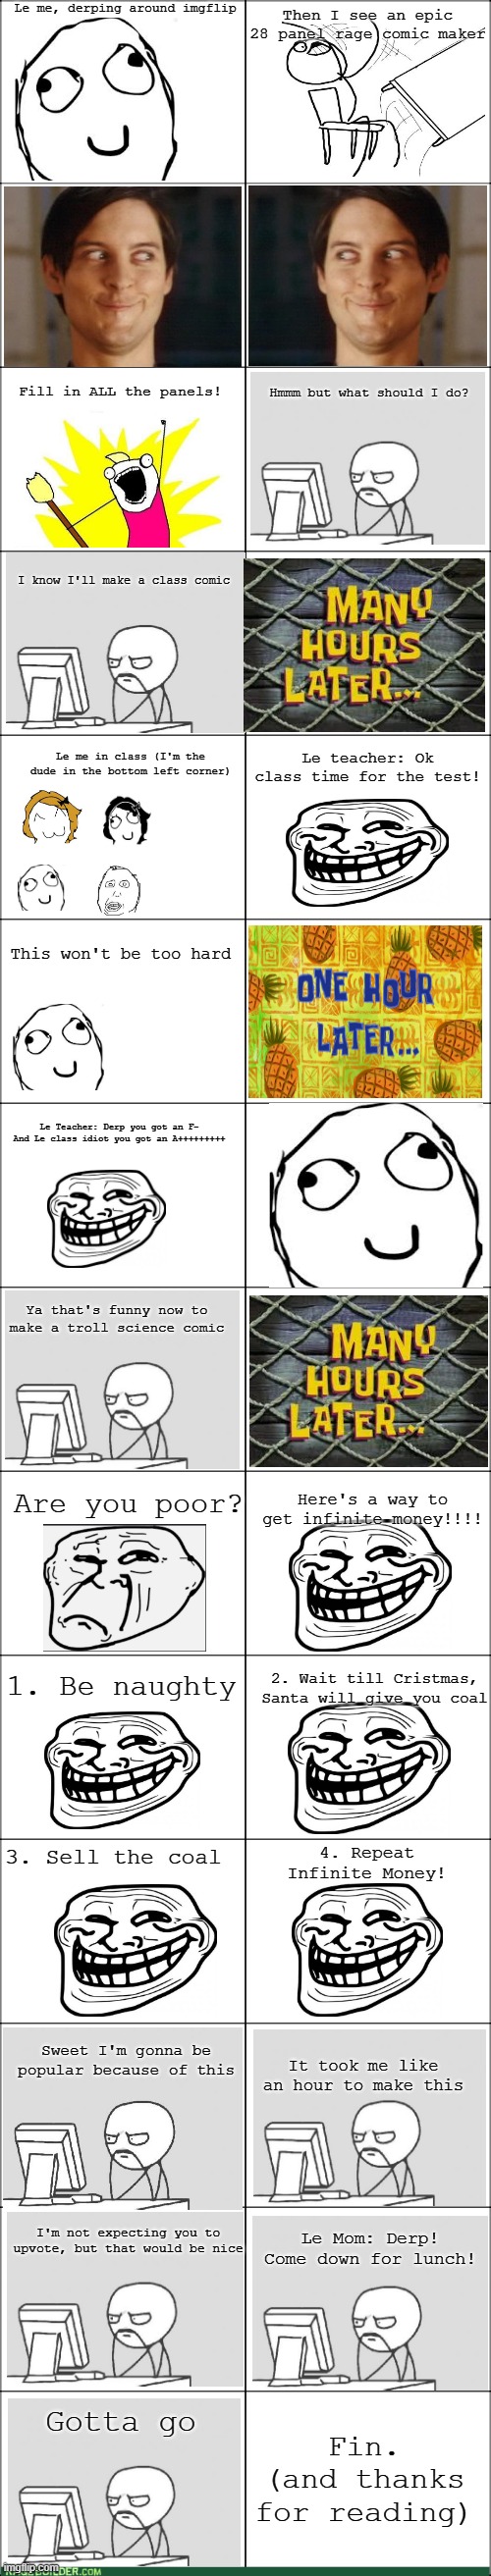 Le awesome rage comic | Le me, derping around imgflip; Then I see an epic 28 panel rage comic maker; Fill in ALL the panels! Hmmm but what should I do? I know I'll make a class comic; Le teacher: Ok class time for the test! Le me in class (I'm the dude in the bottom left corner); This won't be too hard; Le Teacher: Derp you got an F-
And Le class idiot you got an A+++++++++; Ya that's funny now to make a troll science comic; Are you poor? Here's a way to get infinite money!!!! 1. Be naughty; 2. Wait till Cristmas, Santa will give you coal; 3. Sell the coal; 4. Repeat
Infinite Money! Sweet I'm gonna be popular because of this; It took me like an hour to make this; I'm not expecting you to upvote, but that would be nice; Le Mom: Derp! Come down for lunch! Fin.
(and thanks for reading); Gotta go | image tagged in rage comic blank template,rage comics,funny | made w/ Imgflip meme maker